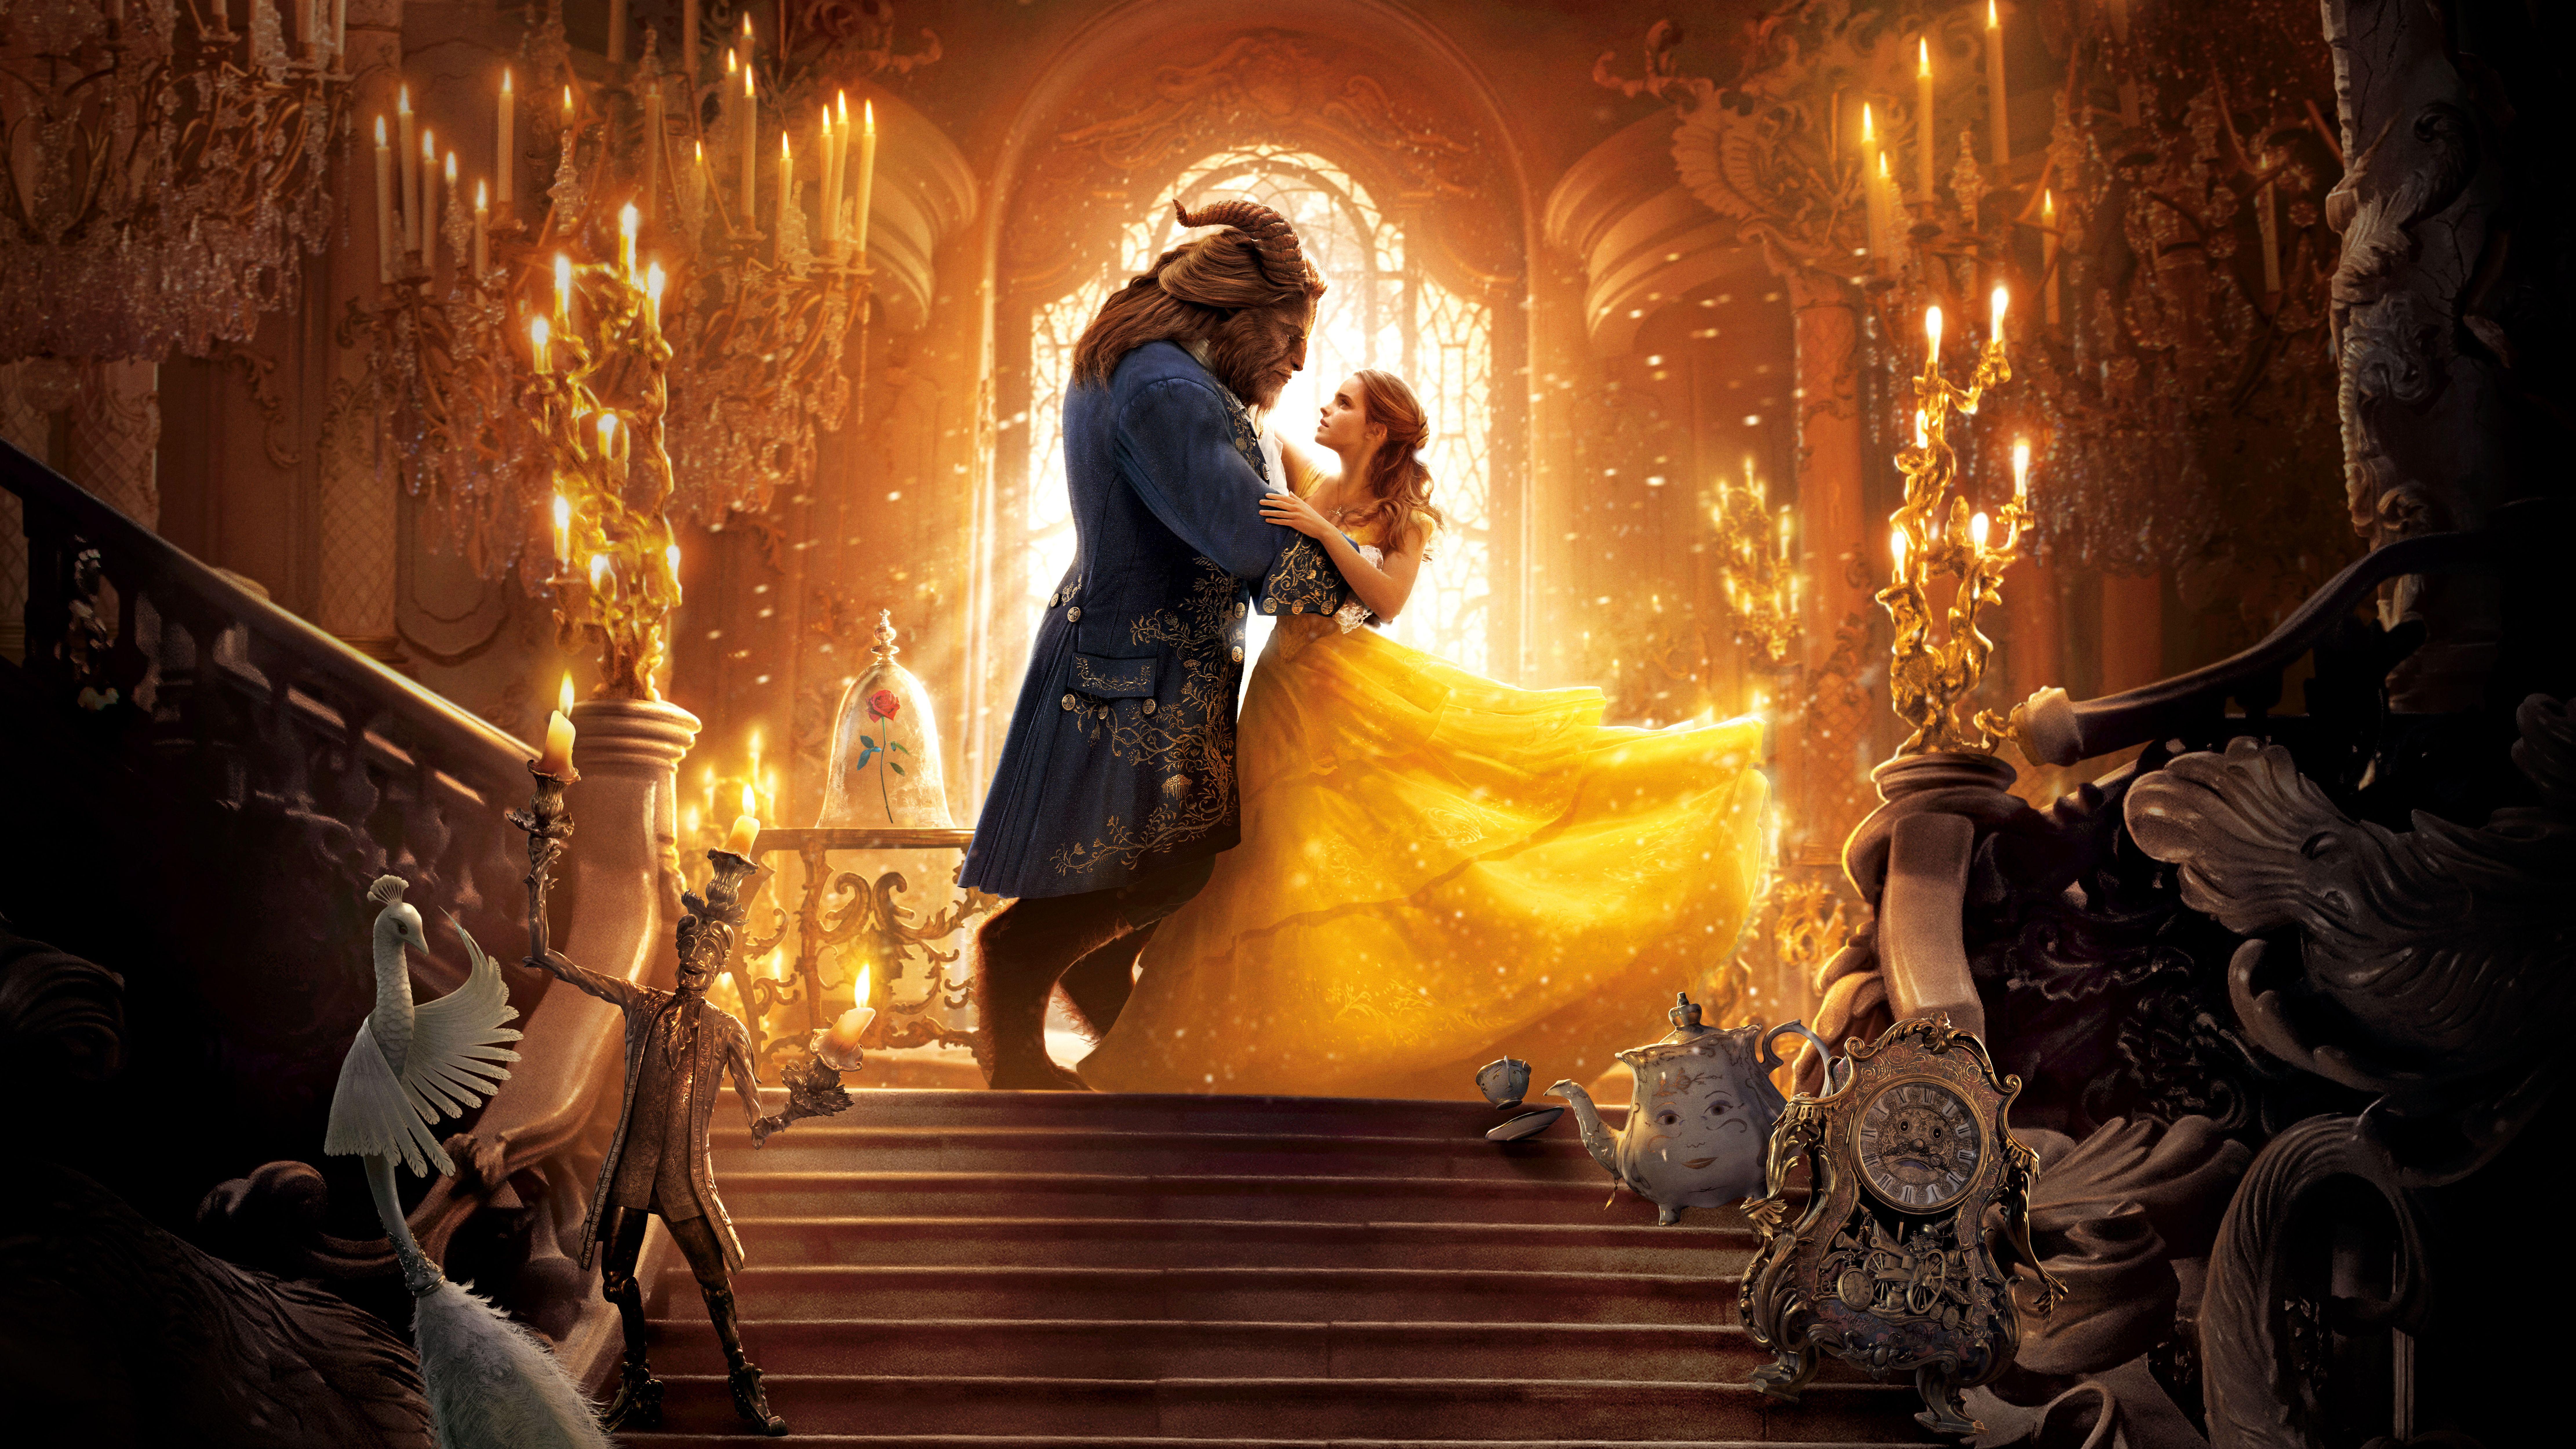 Beauty And The Beast 17 Wallpapers Top Free Beauty And The Beast 17 Backgrounds Wallpaperaccess